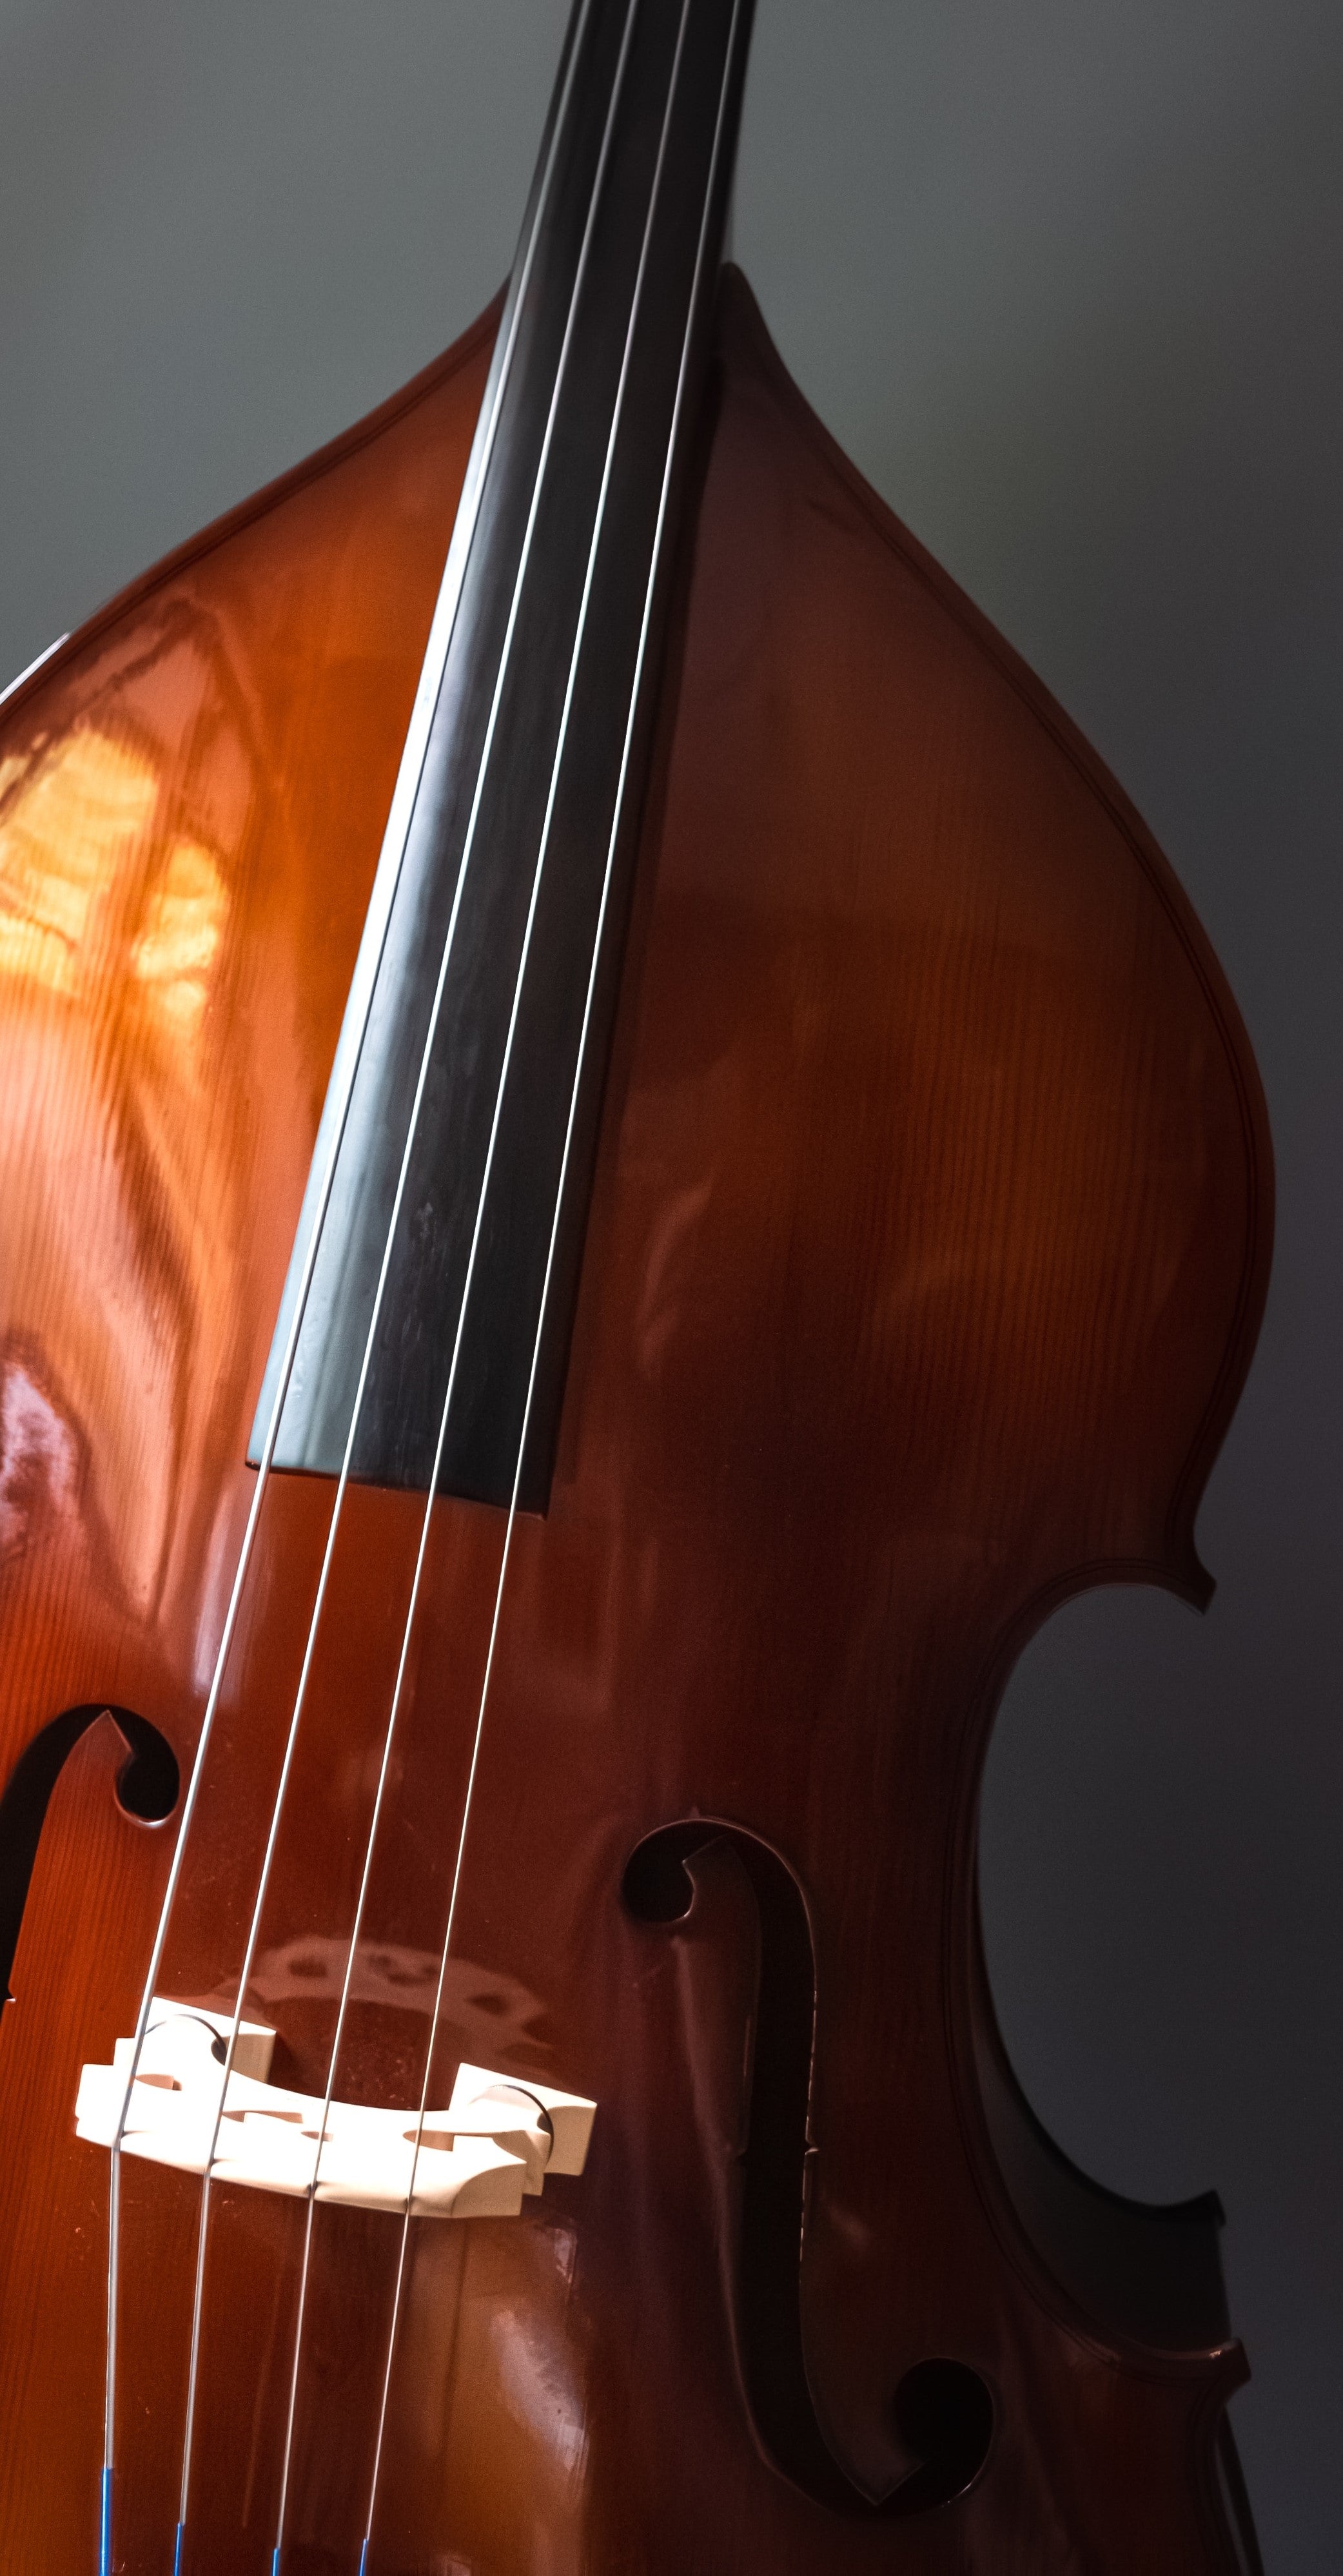 Accessories For Bass – The Long Island Violin Shop